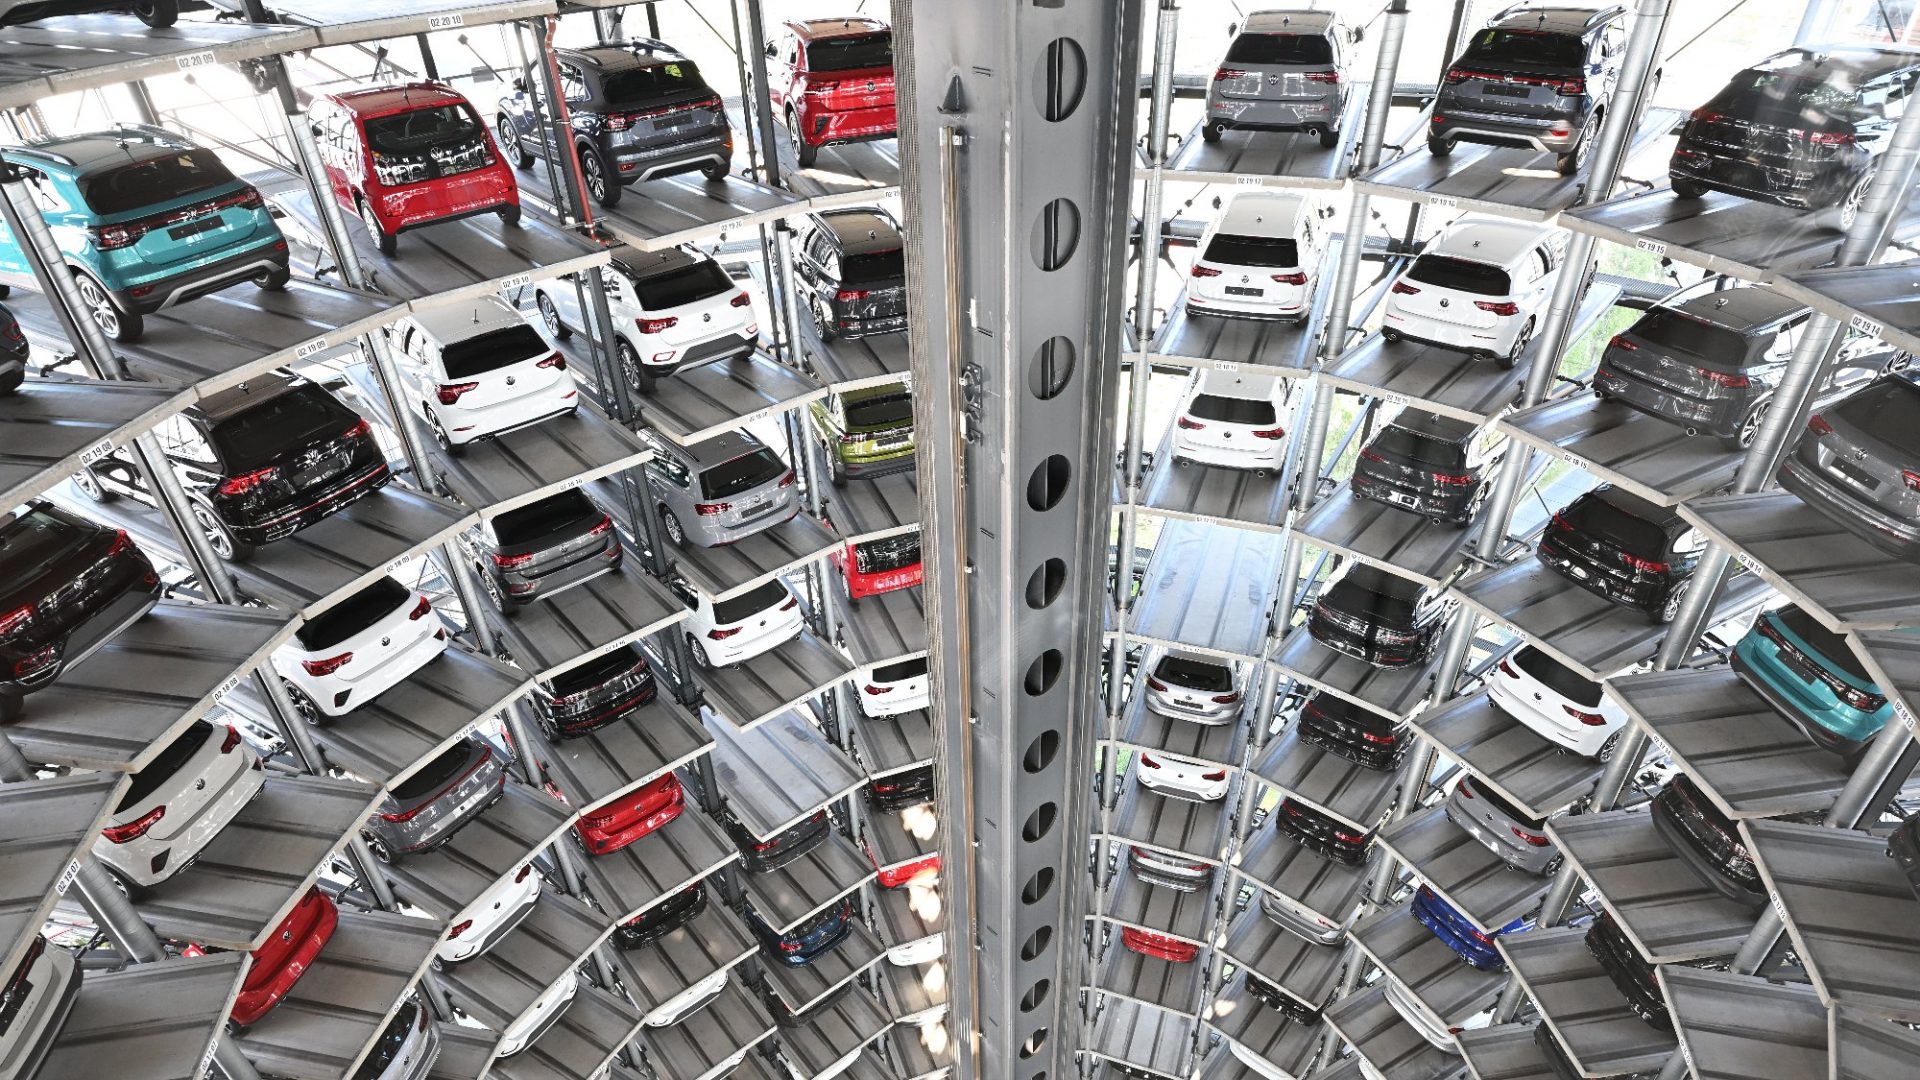 A Volkswagen storage facility in Wolfsburg, Germany, where the car industry is undergoing big changes. Photo: Stuart Franklin/Getty